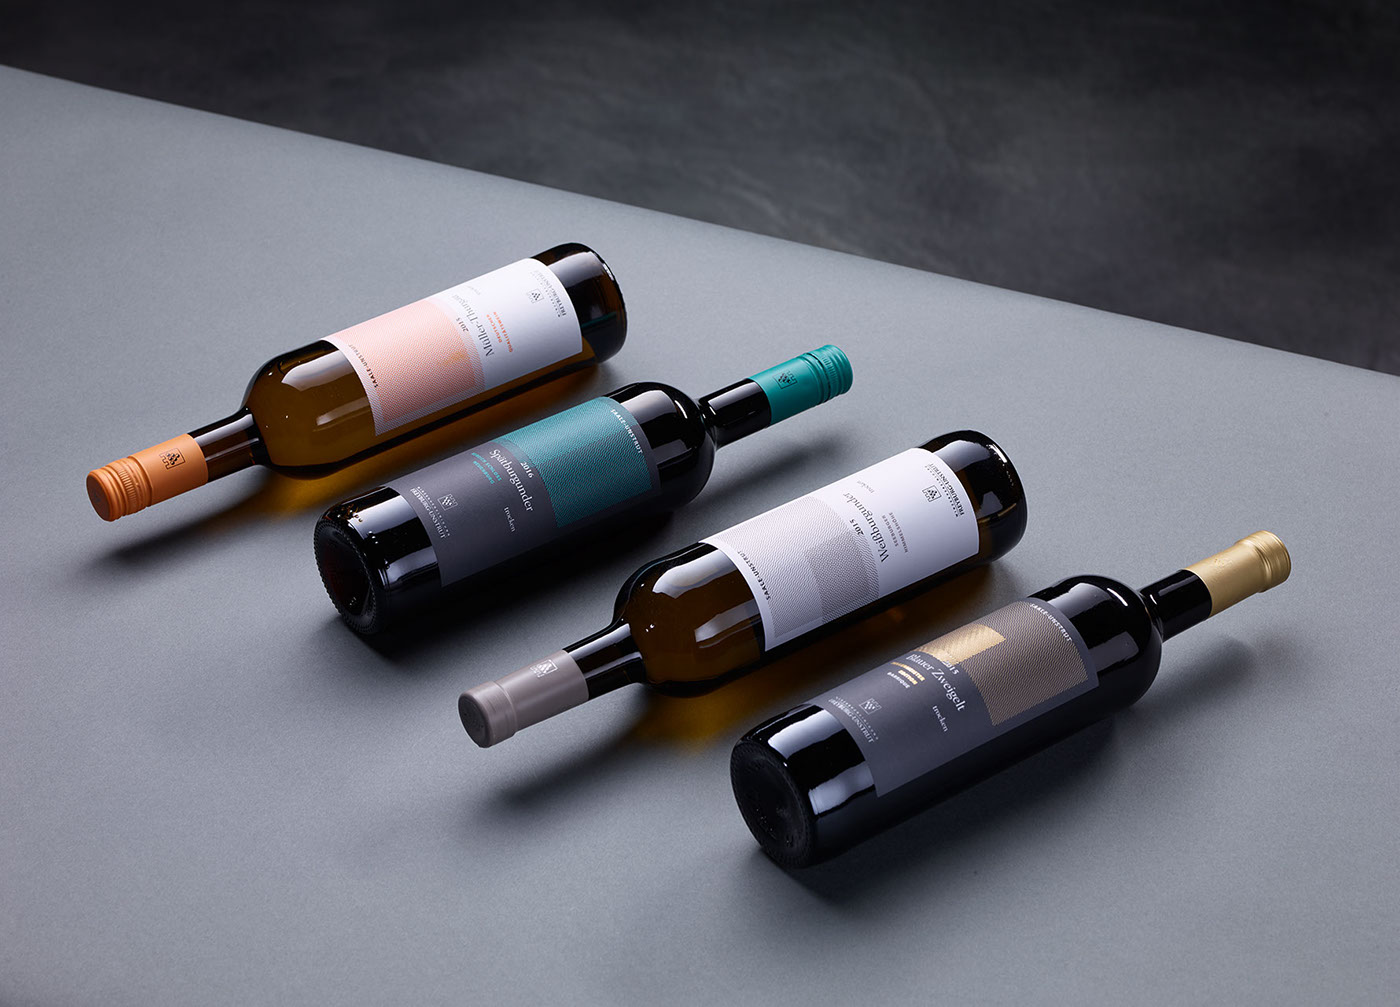 Abstract Packaging Wine Labels Design for a New Generation of Winemakers